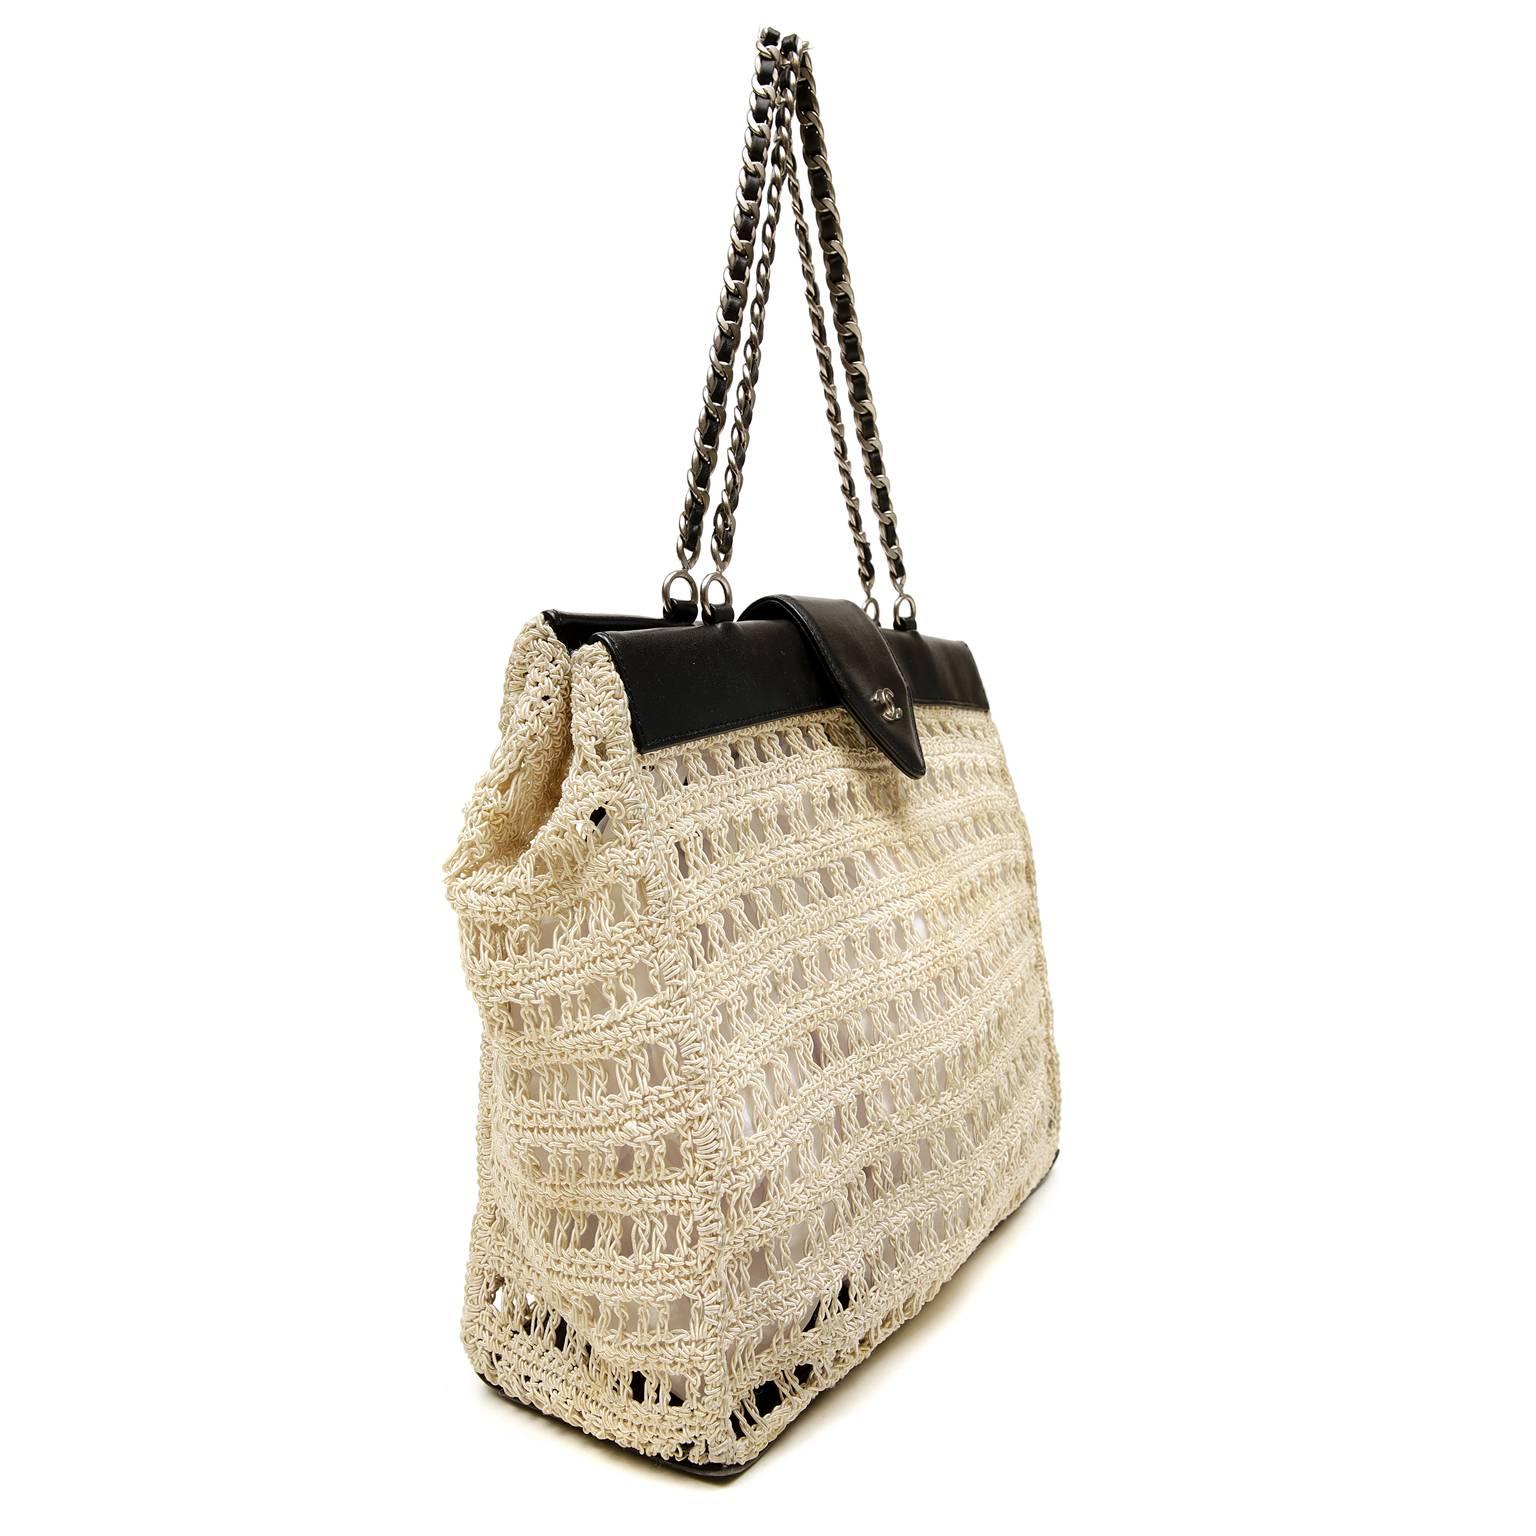 Chanel Beige Crocheted Tote- PRISTINE
  The airy relaxed nature only adds to the extreme chic of this perfect warm weather bag.  
Beige crocheted body is trimmed with black leather and accented with dark silver hardware.  The unlined interior has